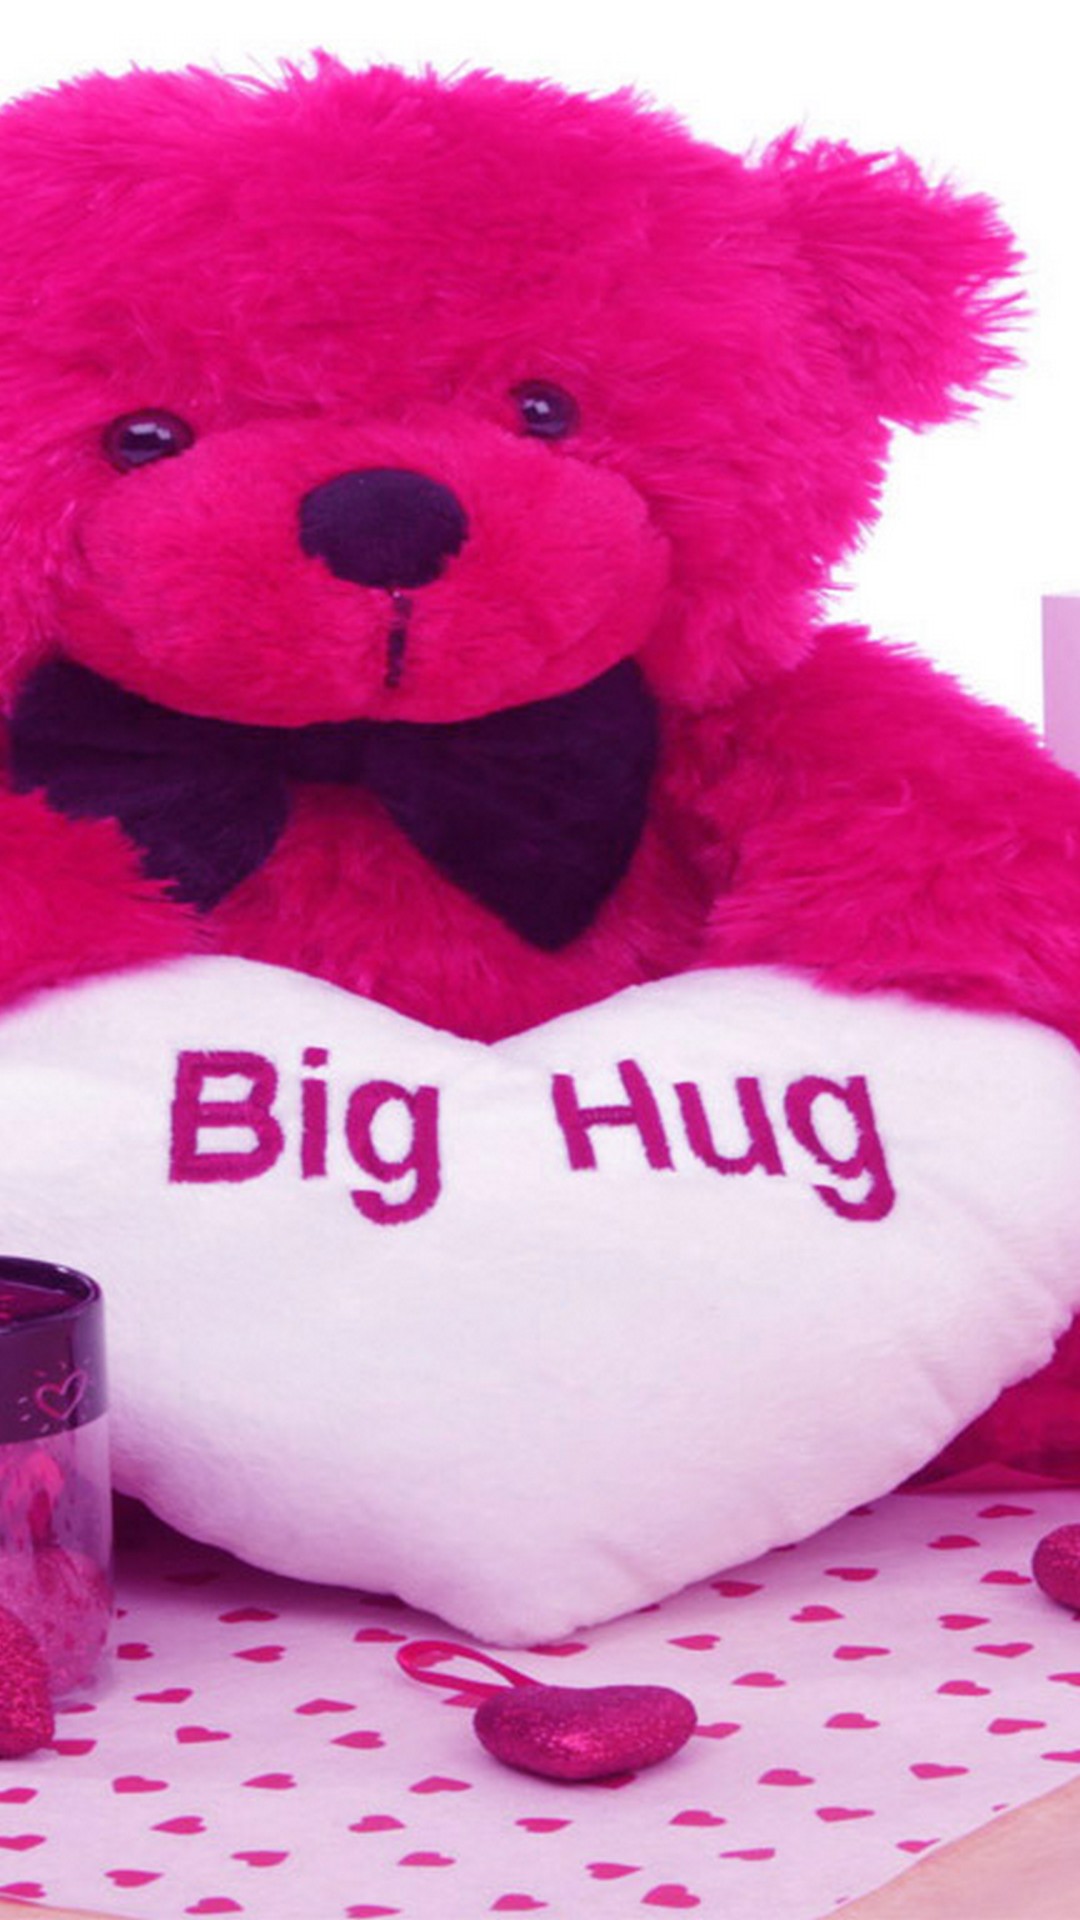 Teddy Bear Big Wallpaper For Android With Image Resolution - Red Teddy Bears Photos Download - HD Wallpaper 